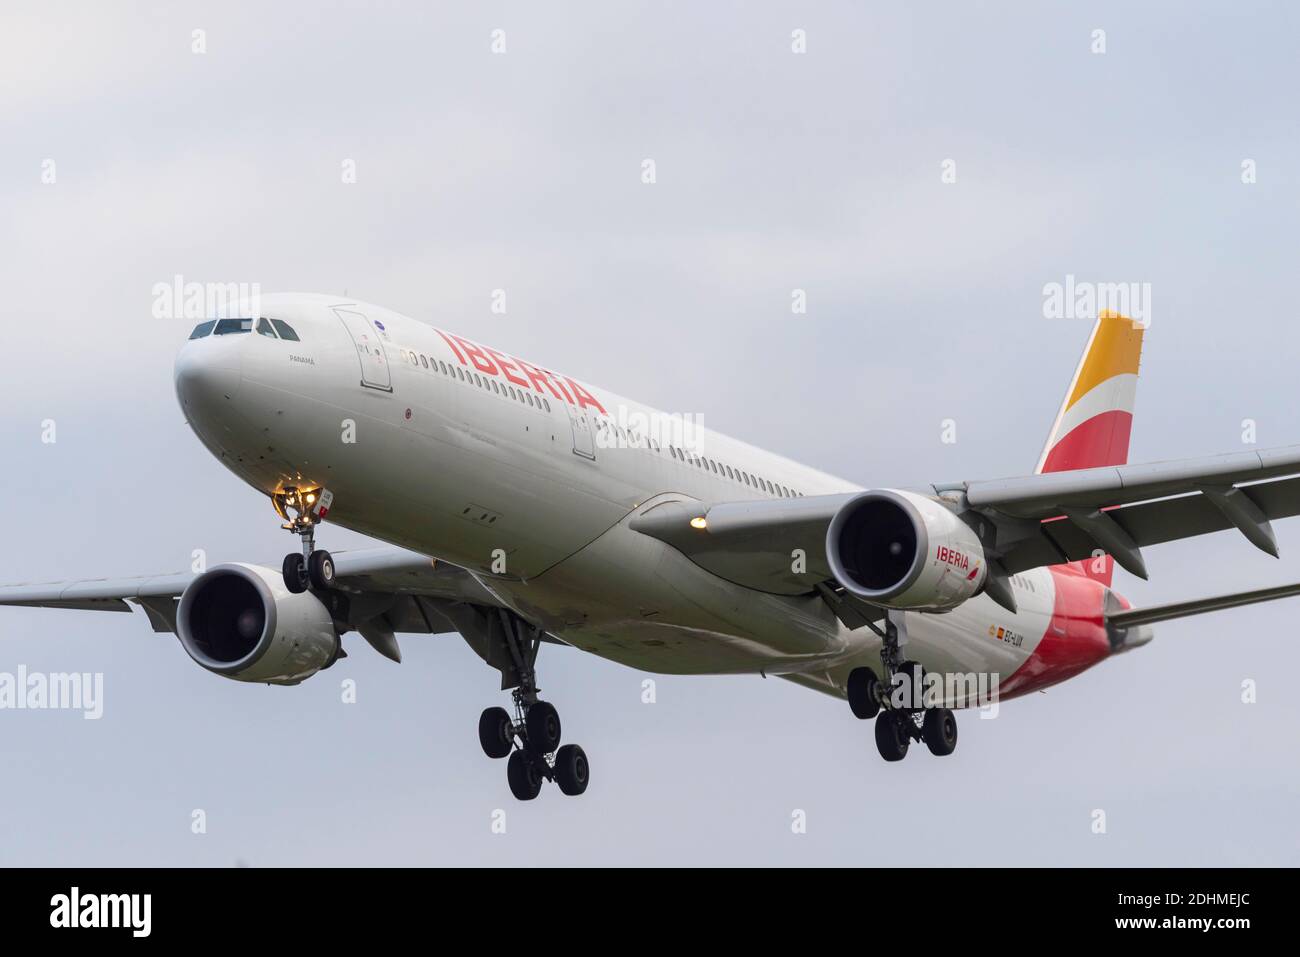 Iberia Airbus A330 jet airliner plane EC-LUX landing at London Heathrow Airport, UK. International Airlines Group, IAG, owned Spanish airline Stock Photo